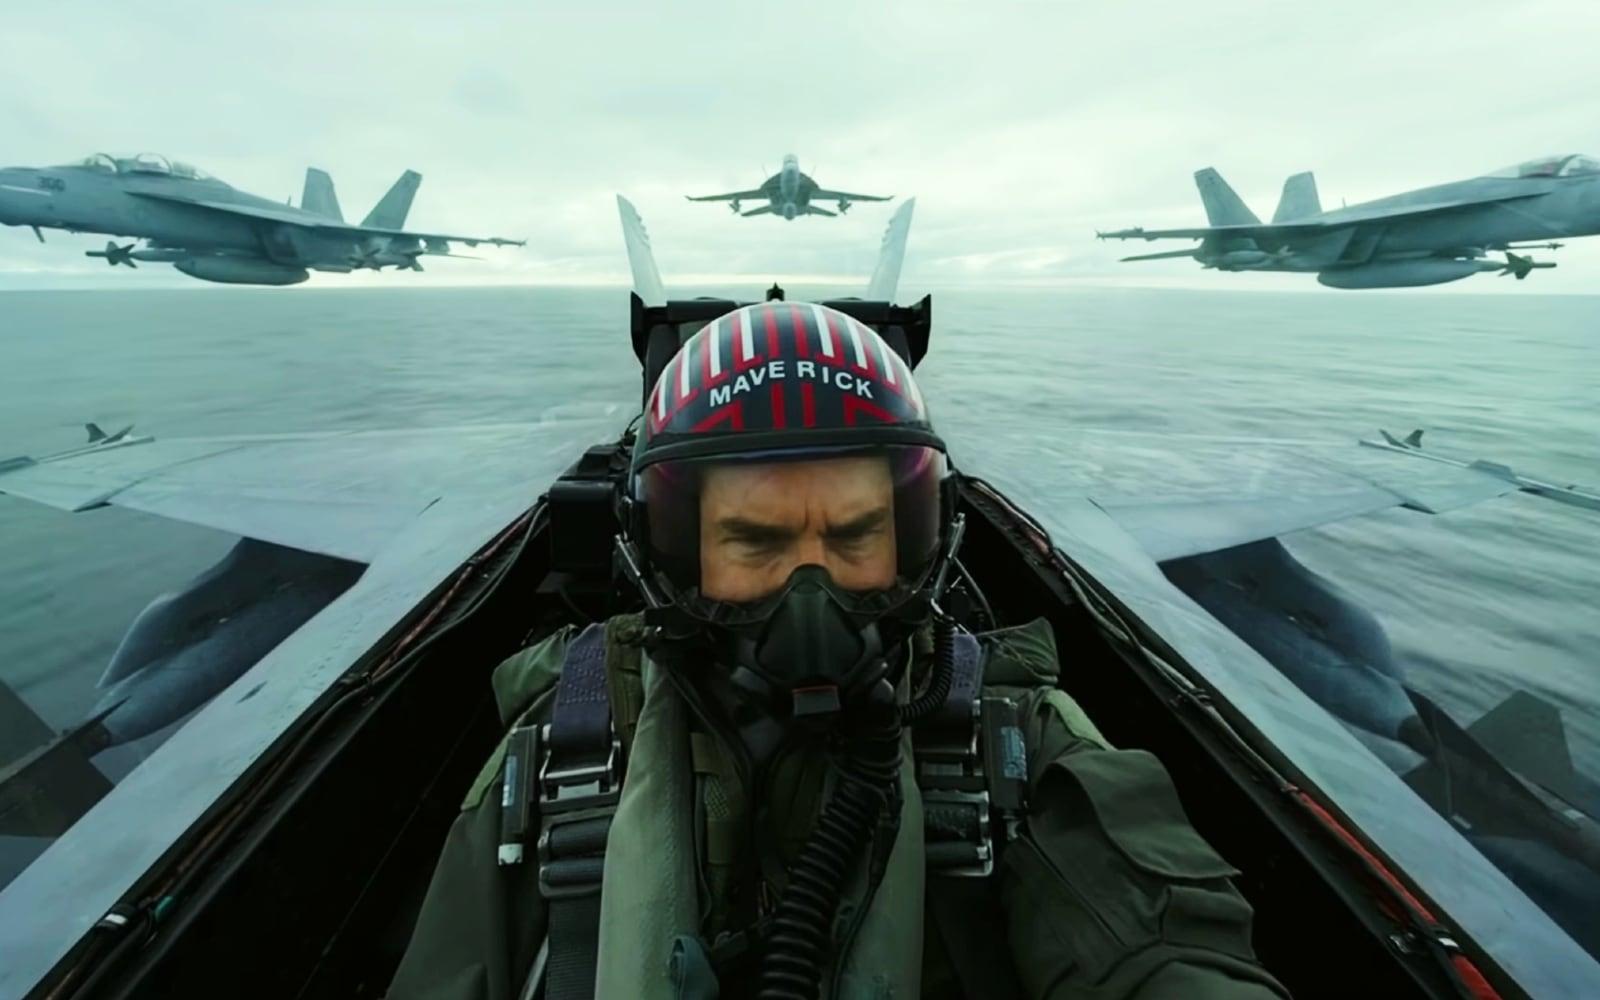 Tom Cruise flying in an F/A-18 Hornet cockpit with 3 more Hornets behind him